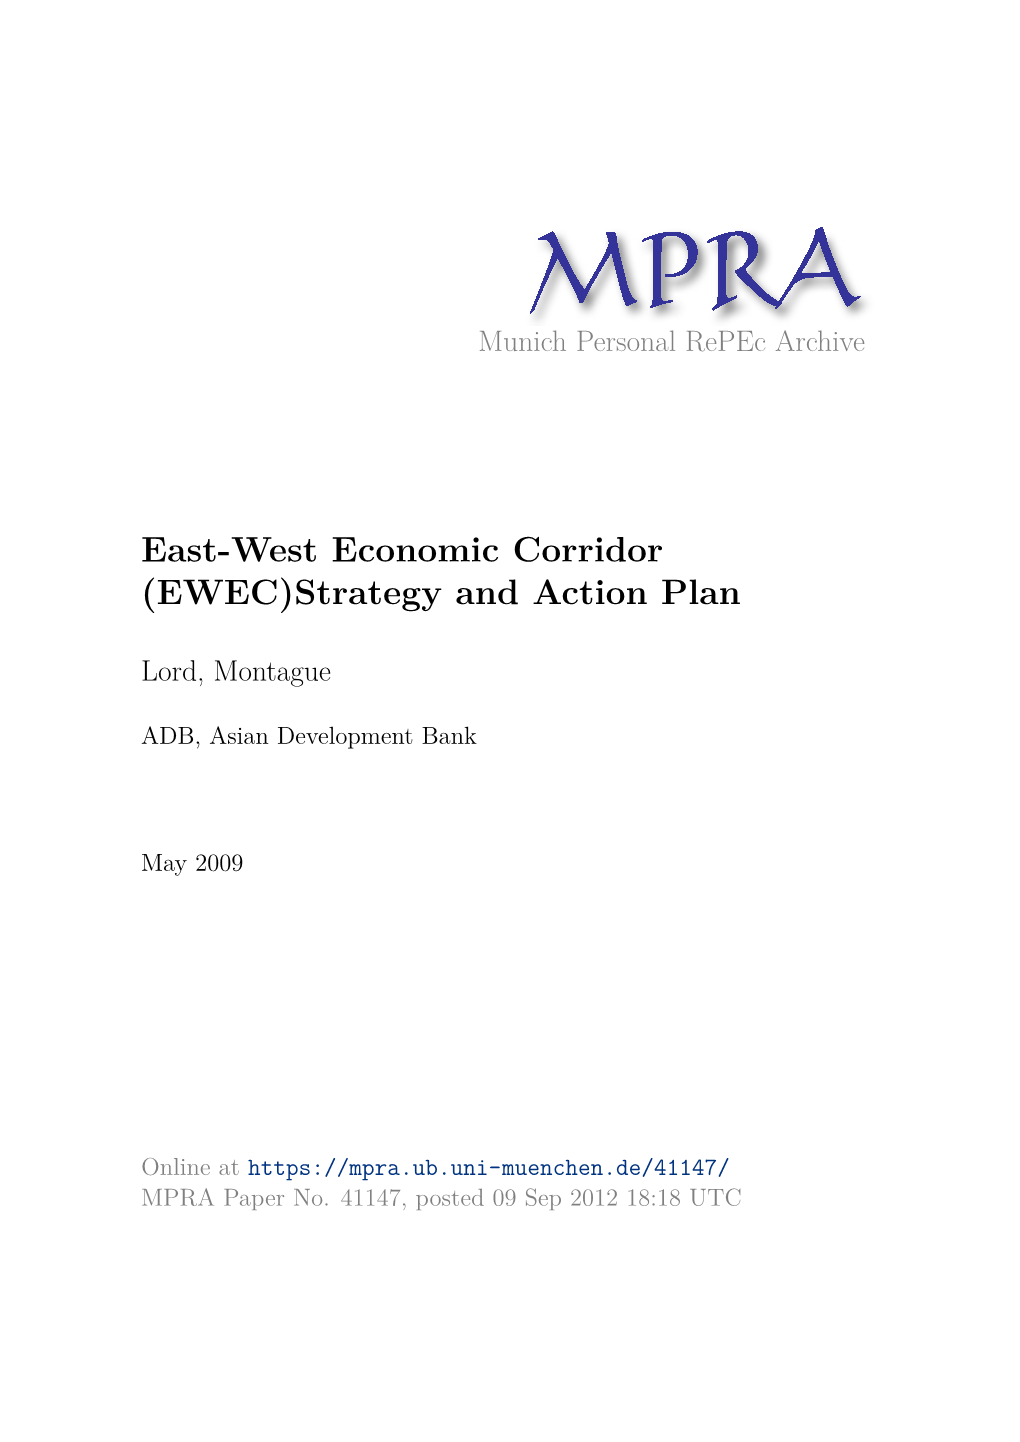 East-West Economic Corridor (EWEC)Strategy and Action Plan